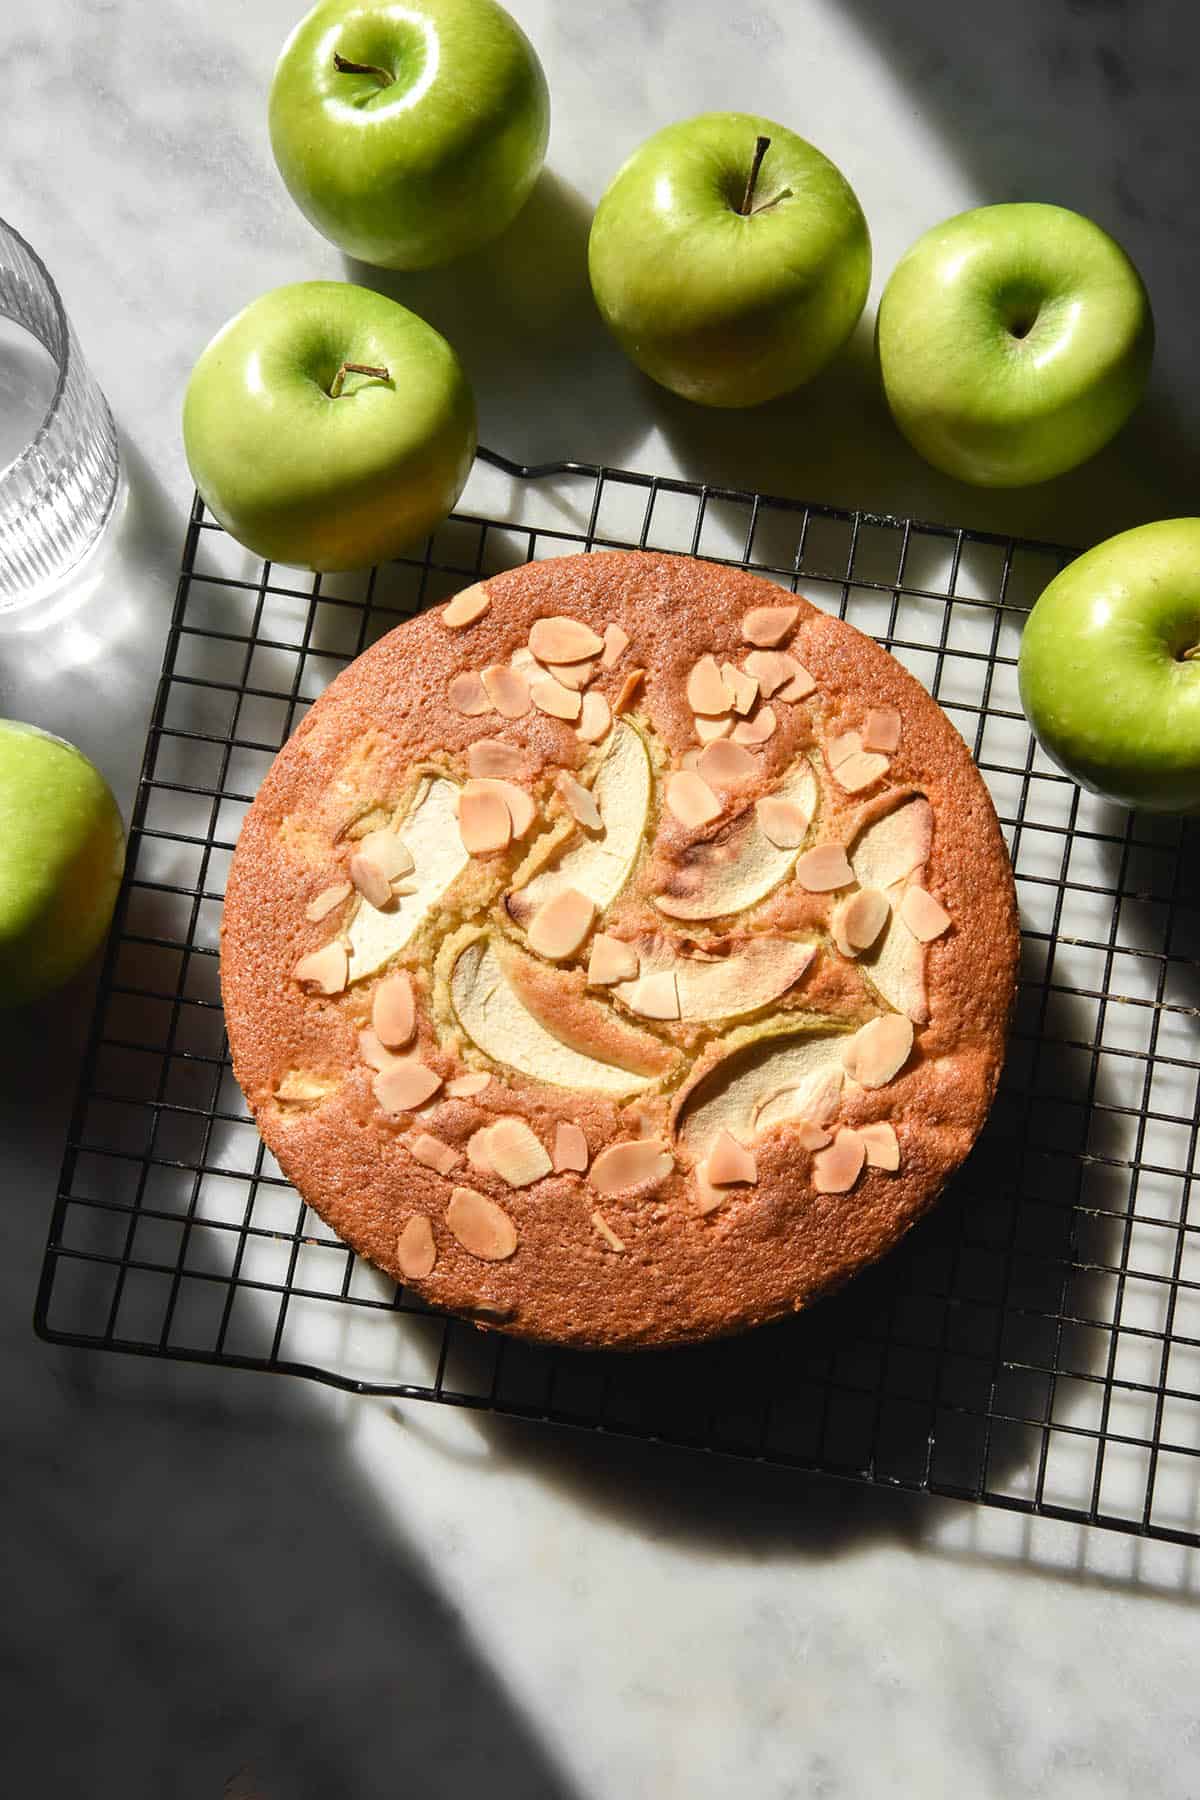 An aerial sunlit image of a gluten free apple cake on a wire cooling rack atop a white marble table. The cake is golden brown and topped with extra apple slices and sliced almonds. It is surrounded by green apples and a sunlit glass of water